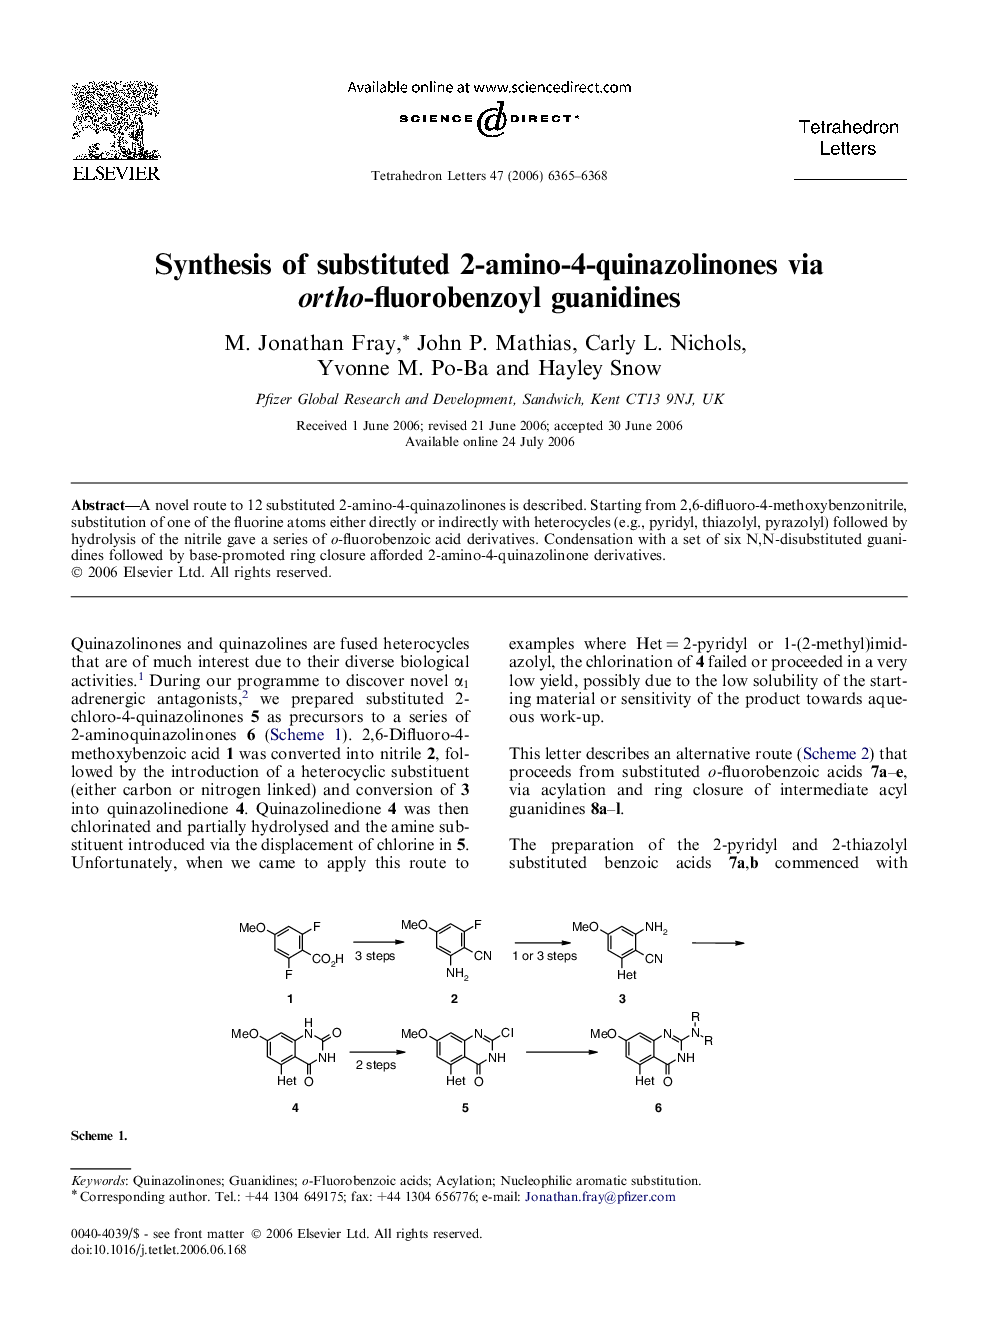 Synthesis of substituted 2-amino-4-quinazolinones via ortho-fluorobenzoyl guanidines